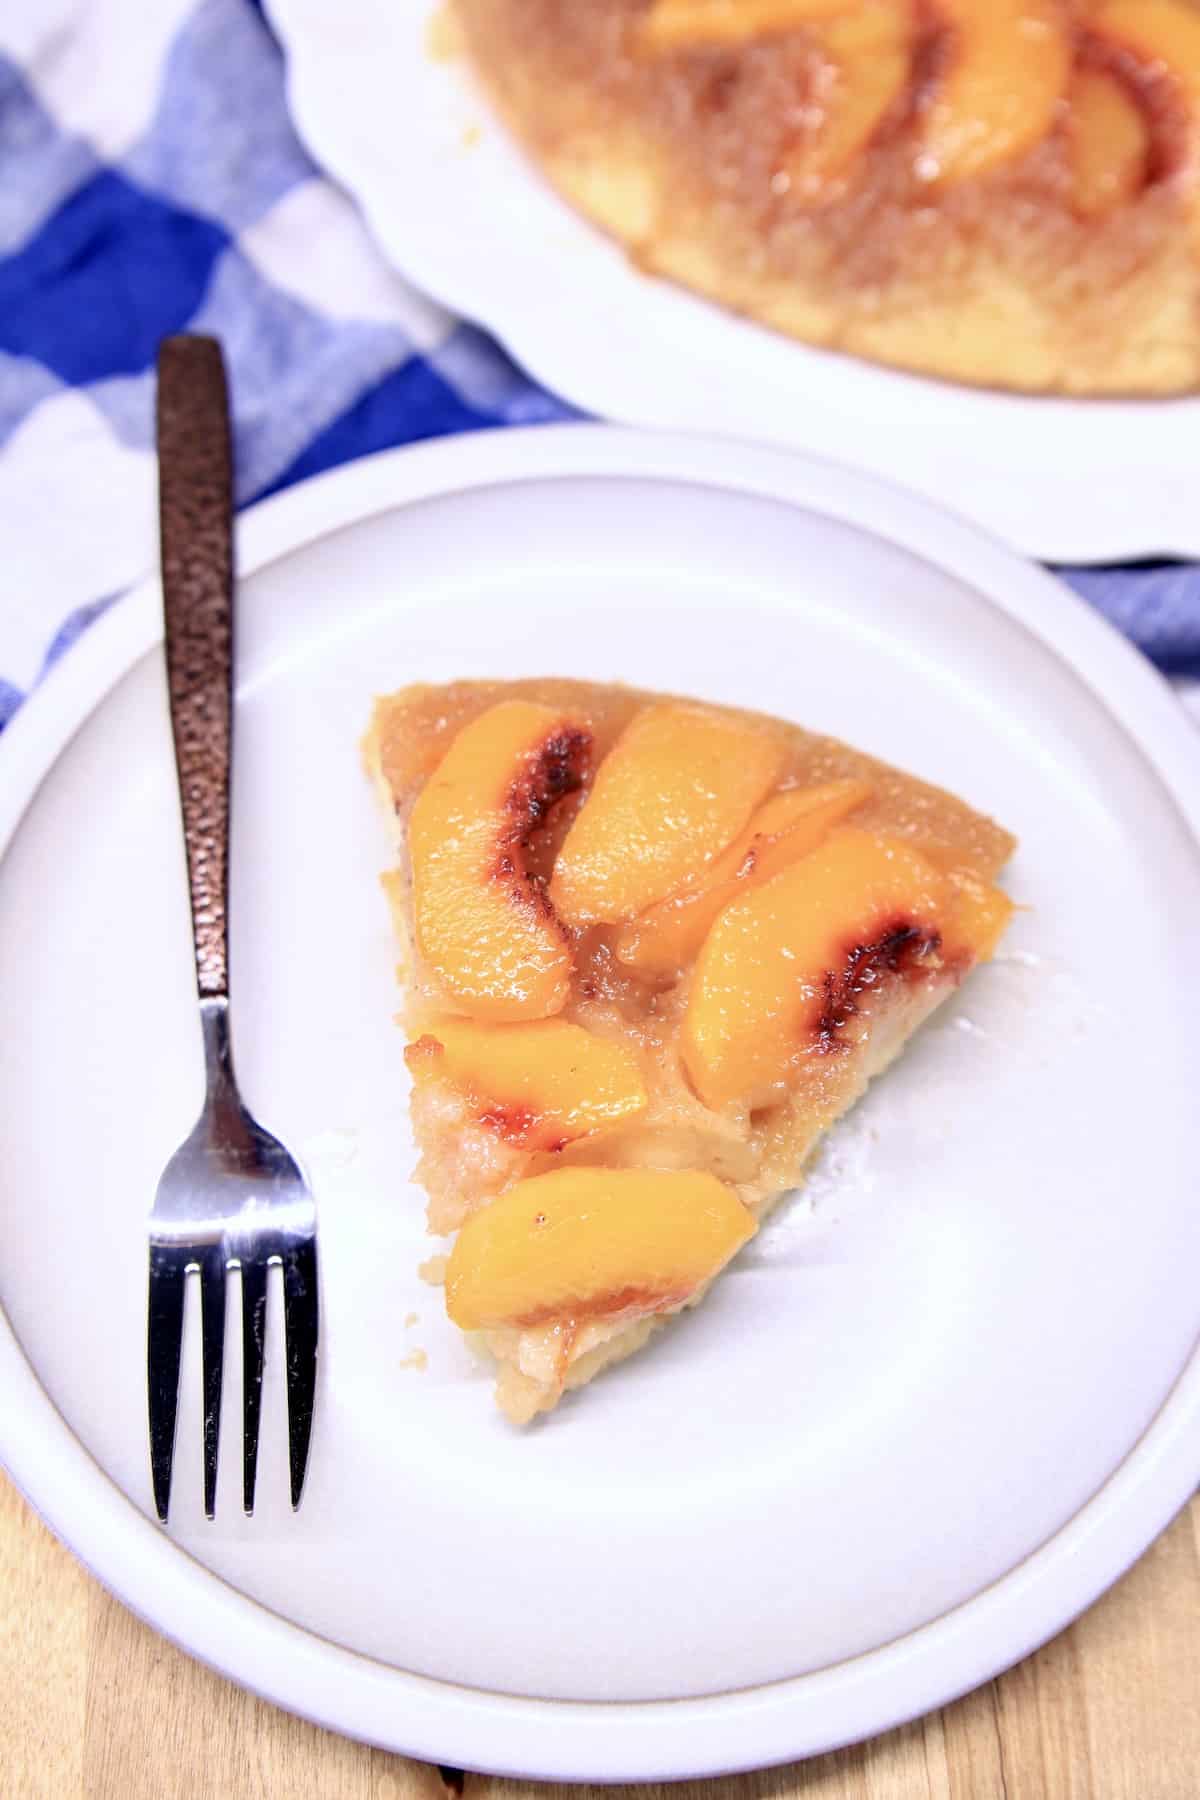 Slice of peach upside down cake on a white plate with fork.